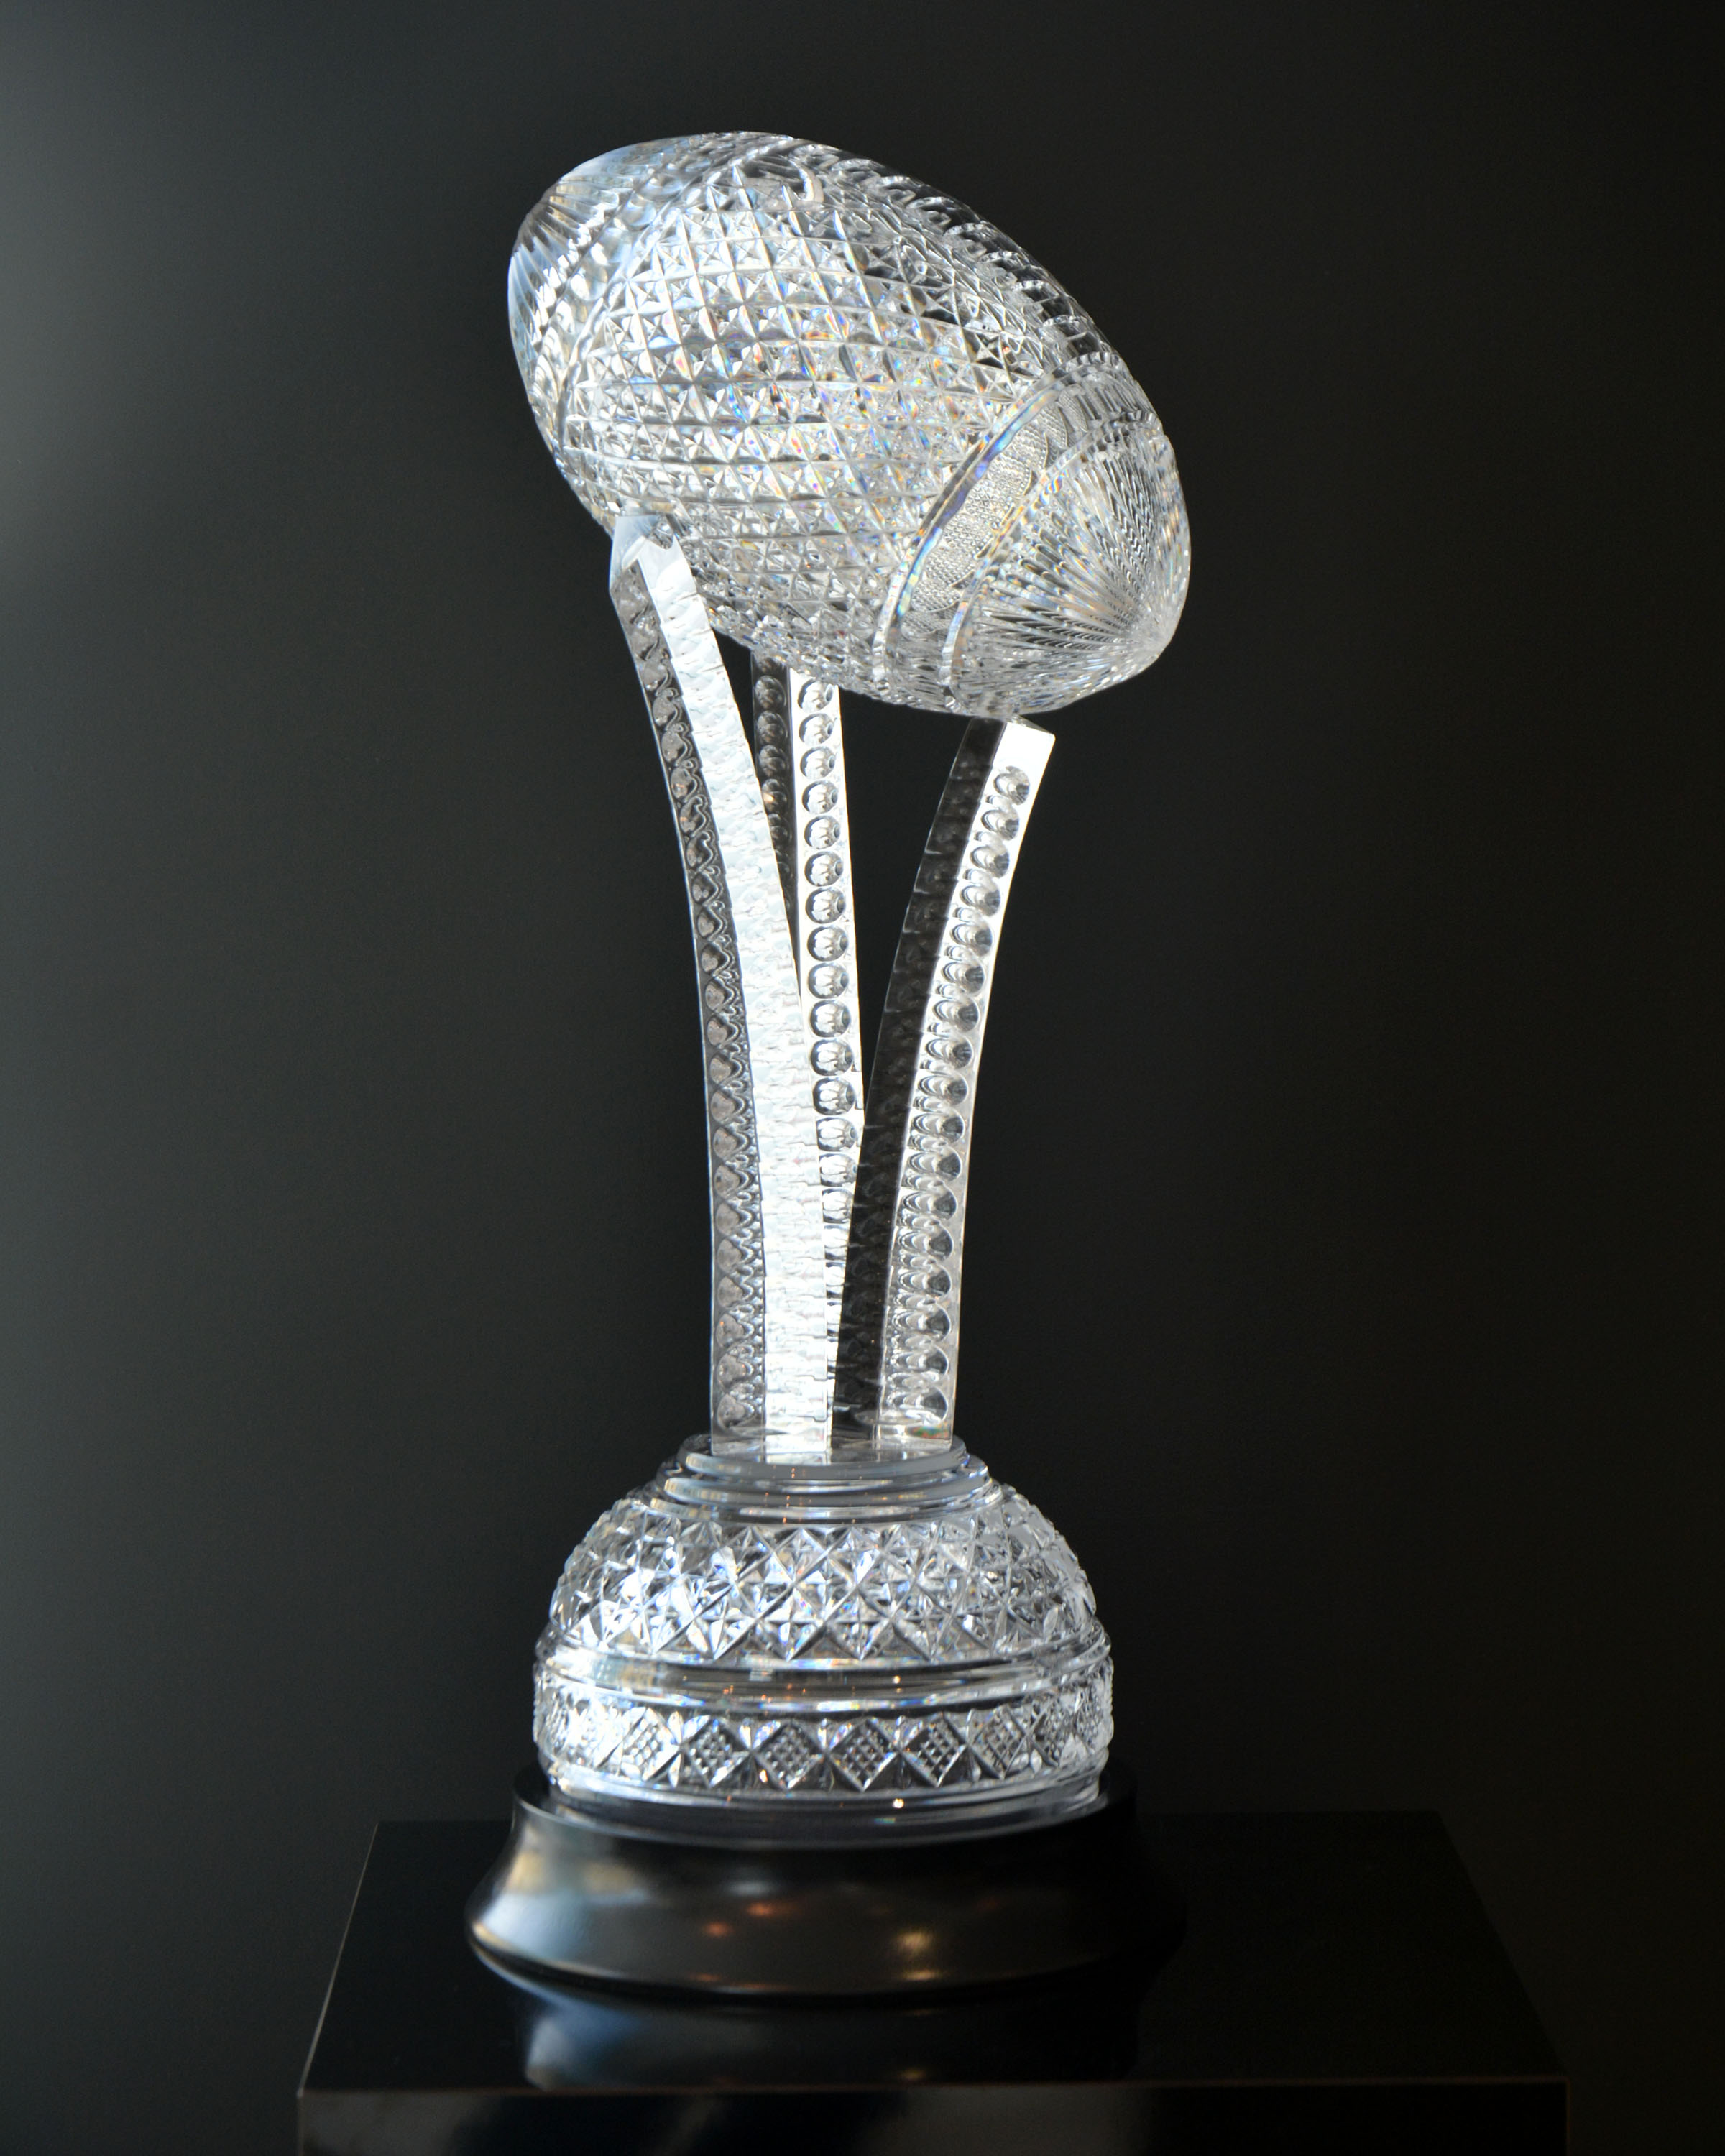 The House of Waterford Crystal Keough–Naughton College Football Trophy.